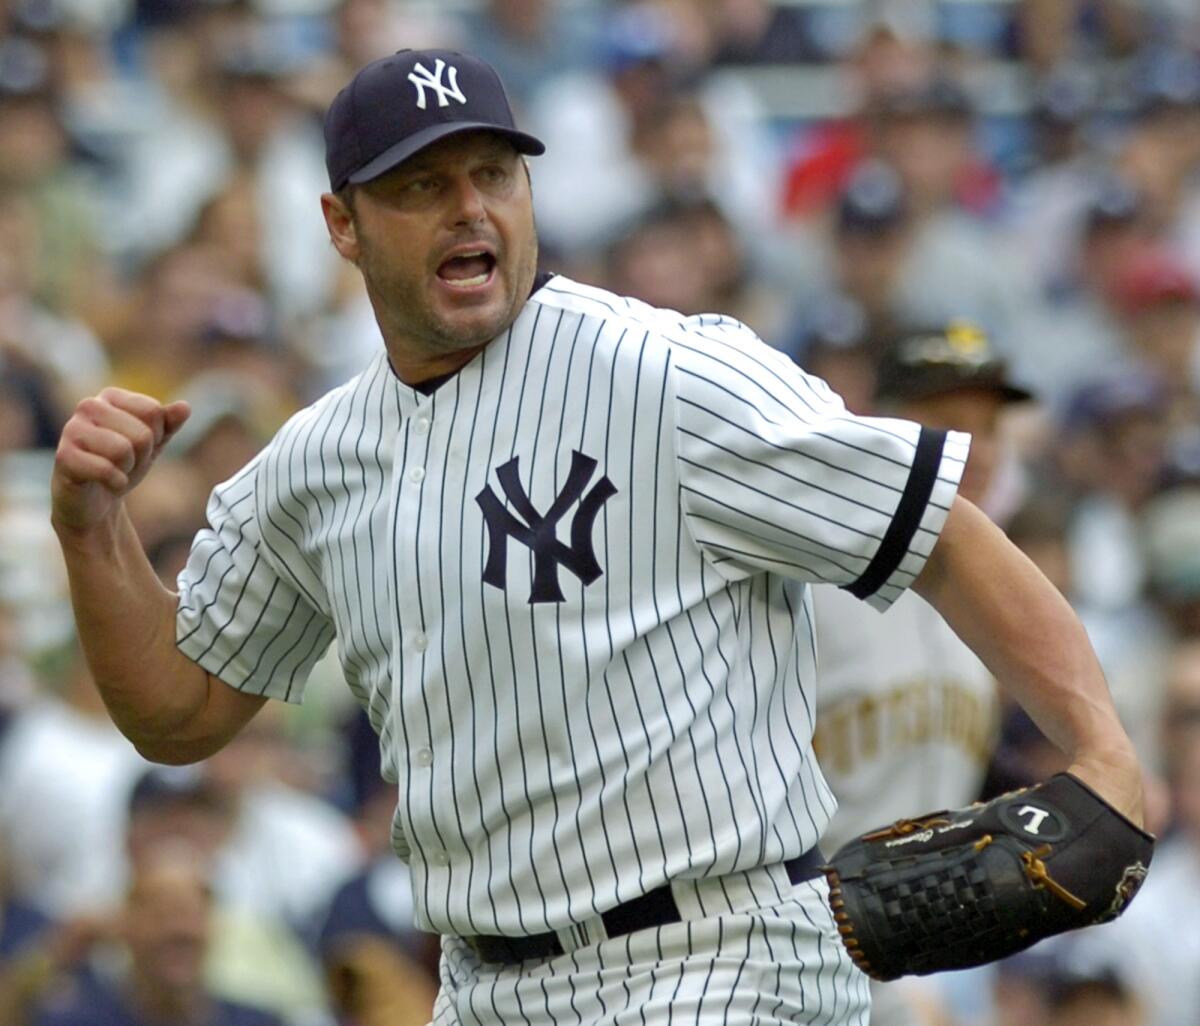 Roger Clemens, shown in 2007, is expected to get a boost in Hall of Fame votes this year after former commissioner Bud Selig got the nod last month.